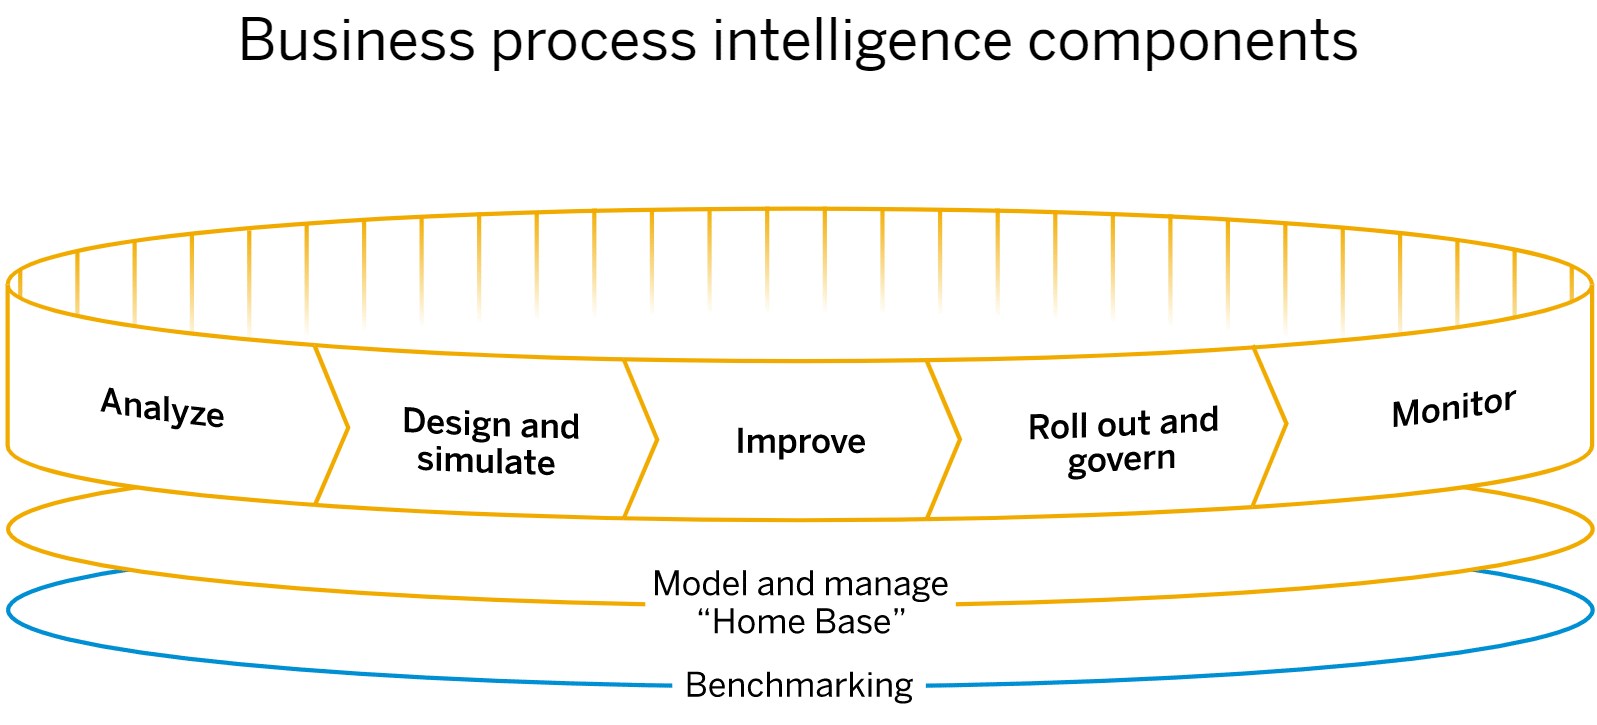 Graphic: components business process intelligence